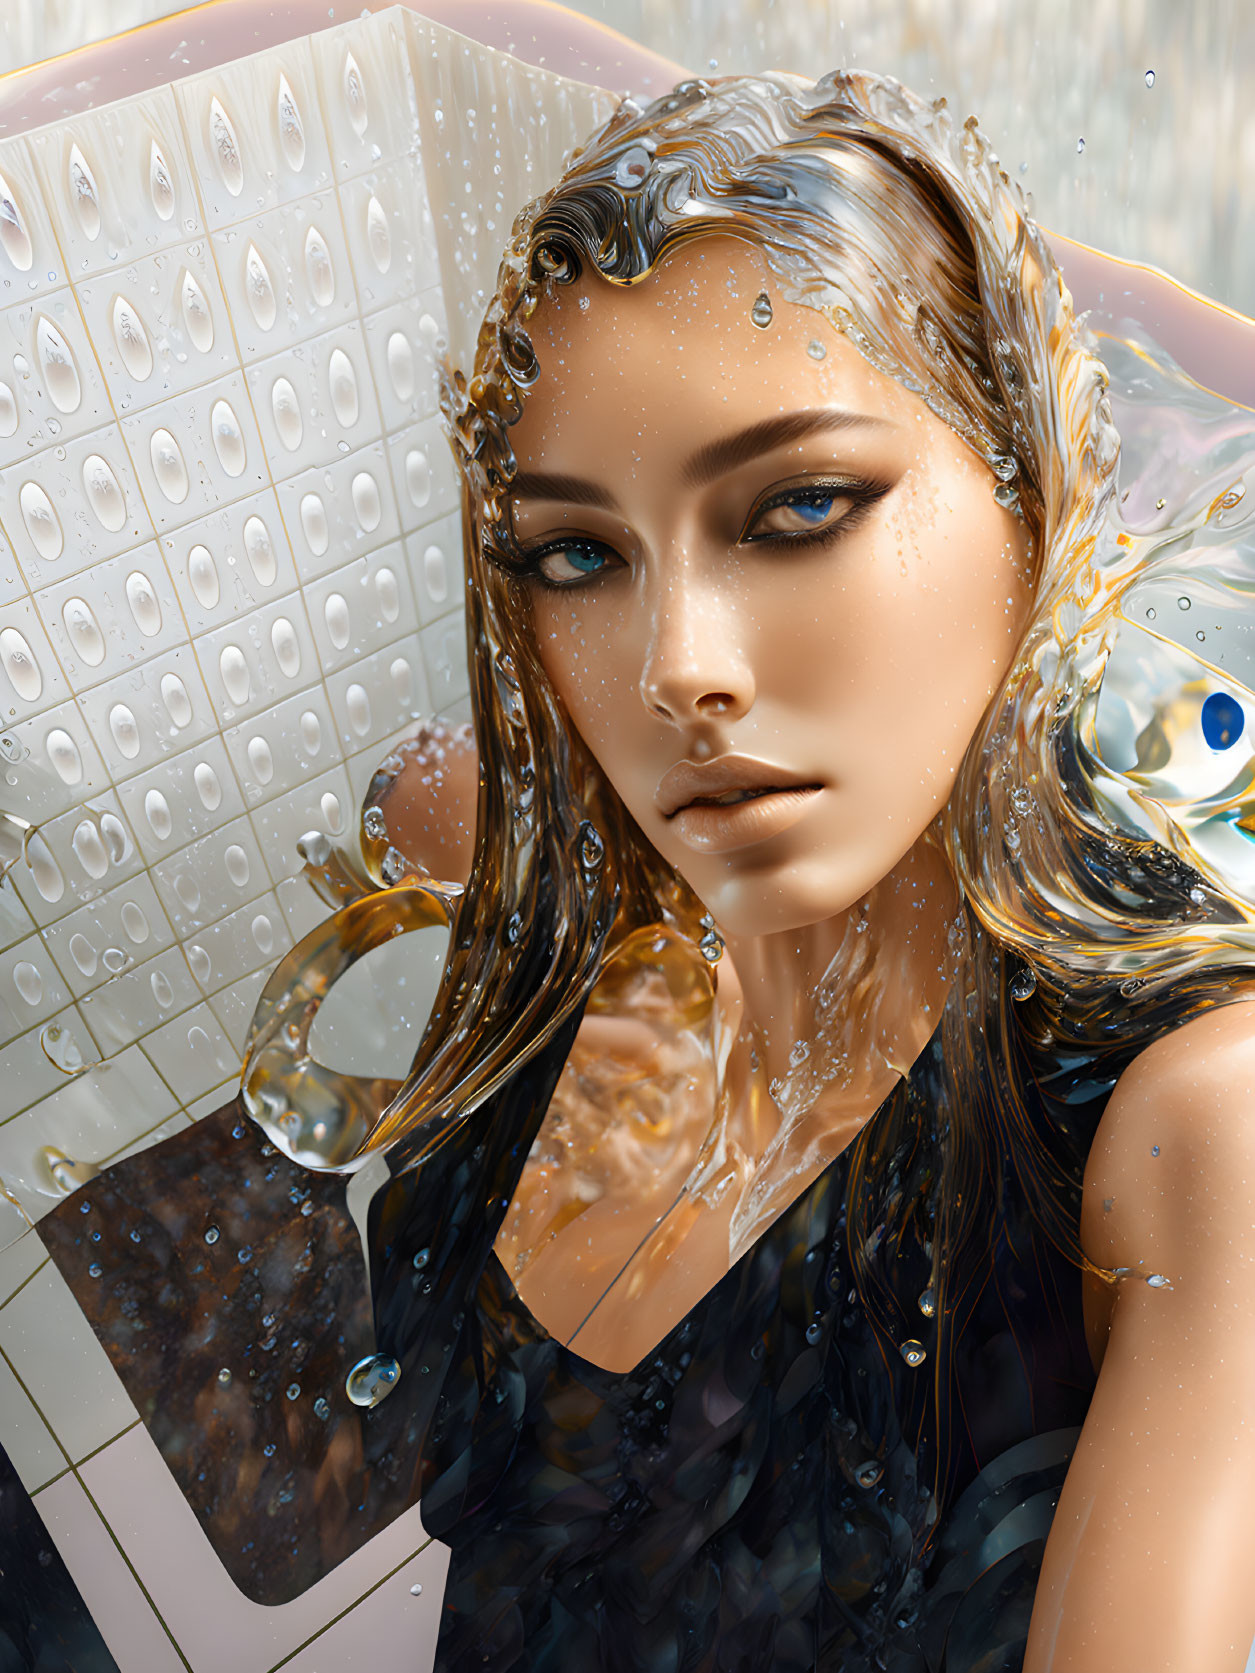 Digital Artwork: Woman with Golden Skin Submerged in Water